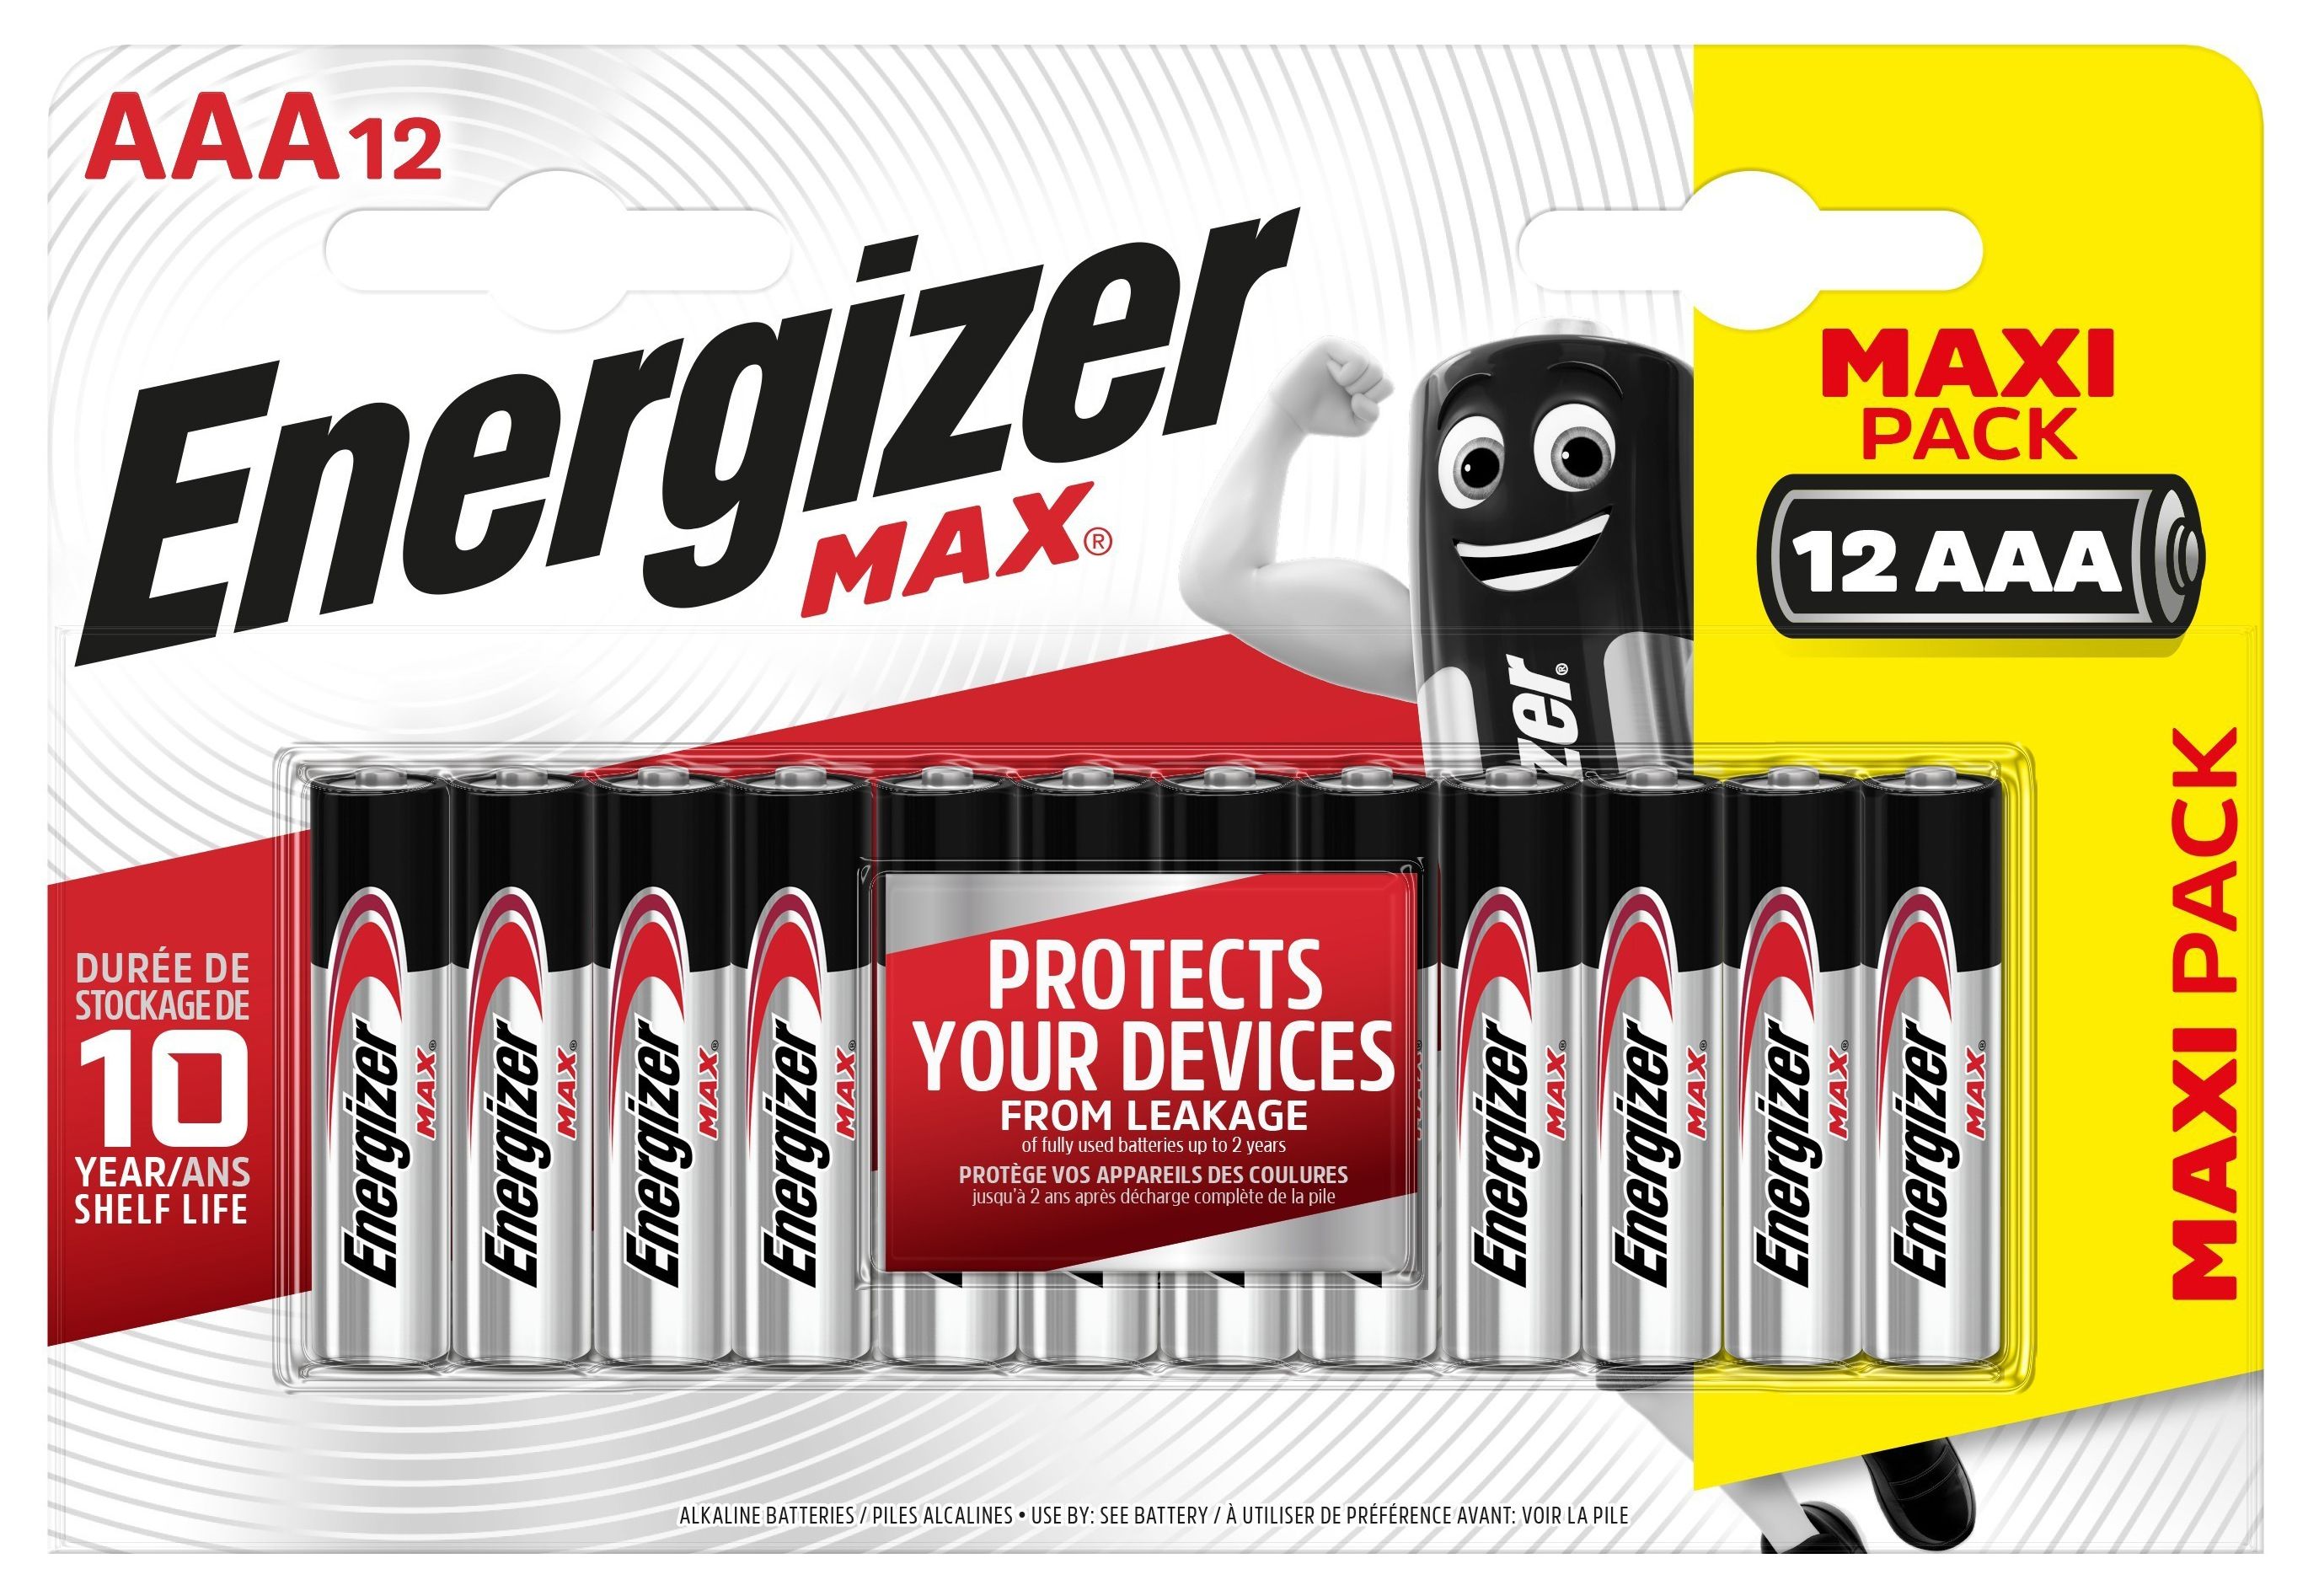 Energizer Max AAA Batteries - Pack of 12